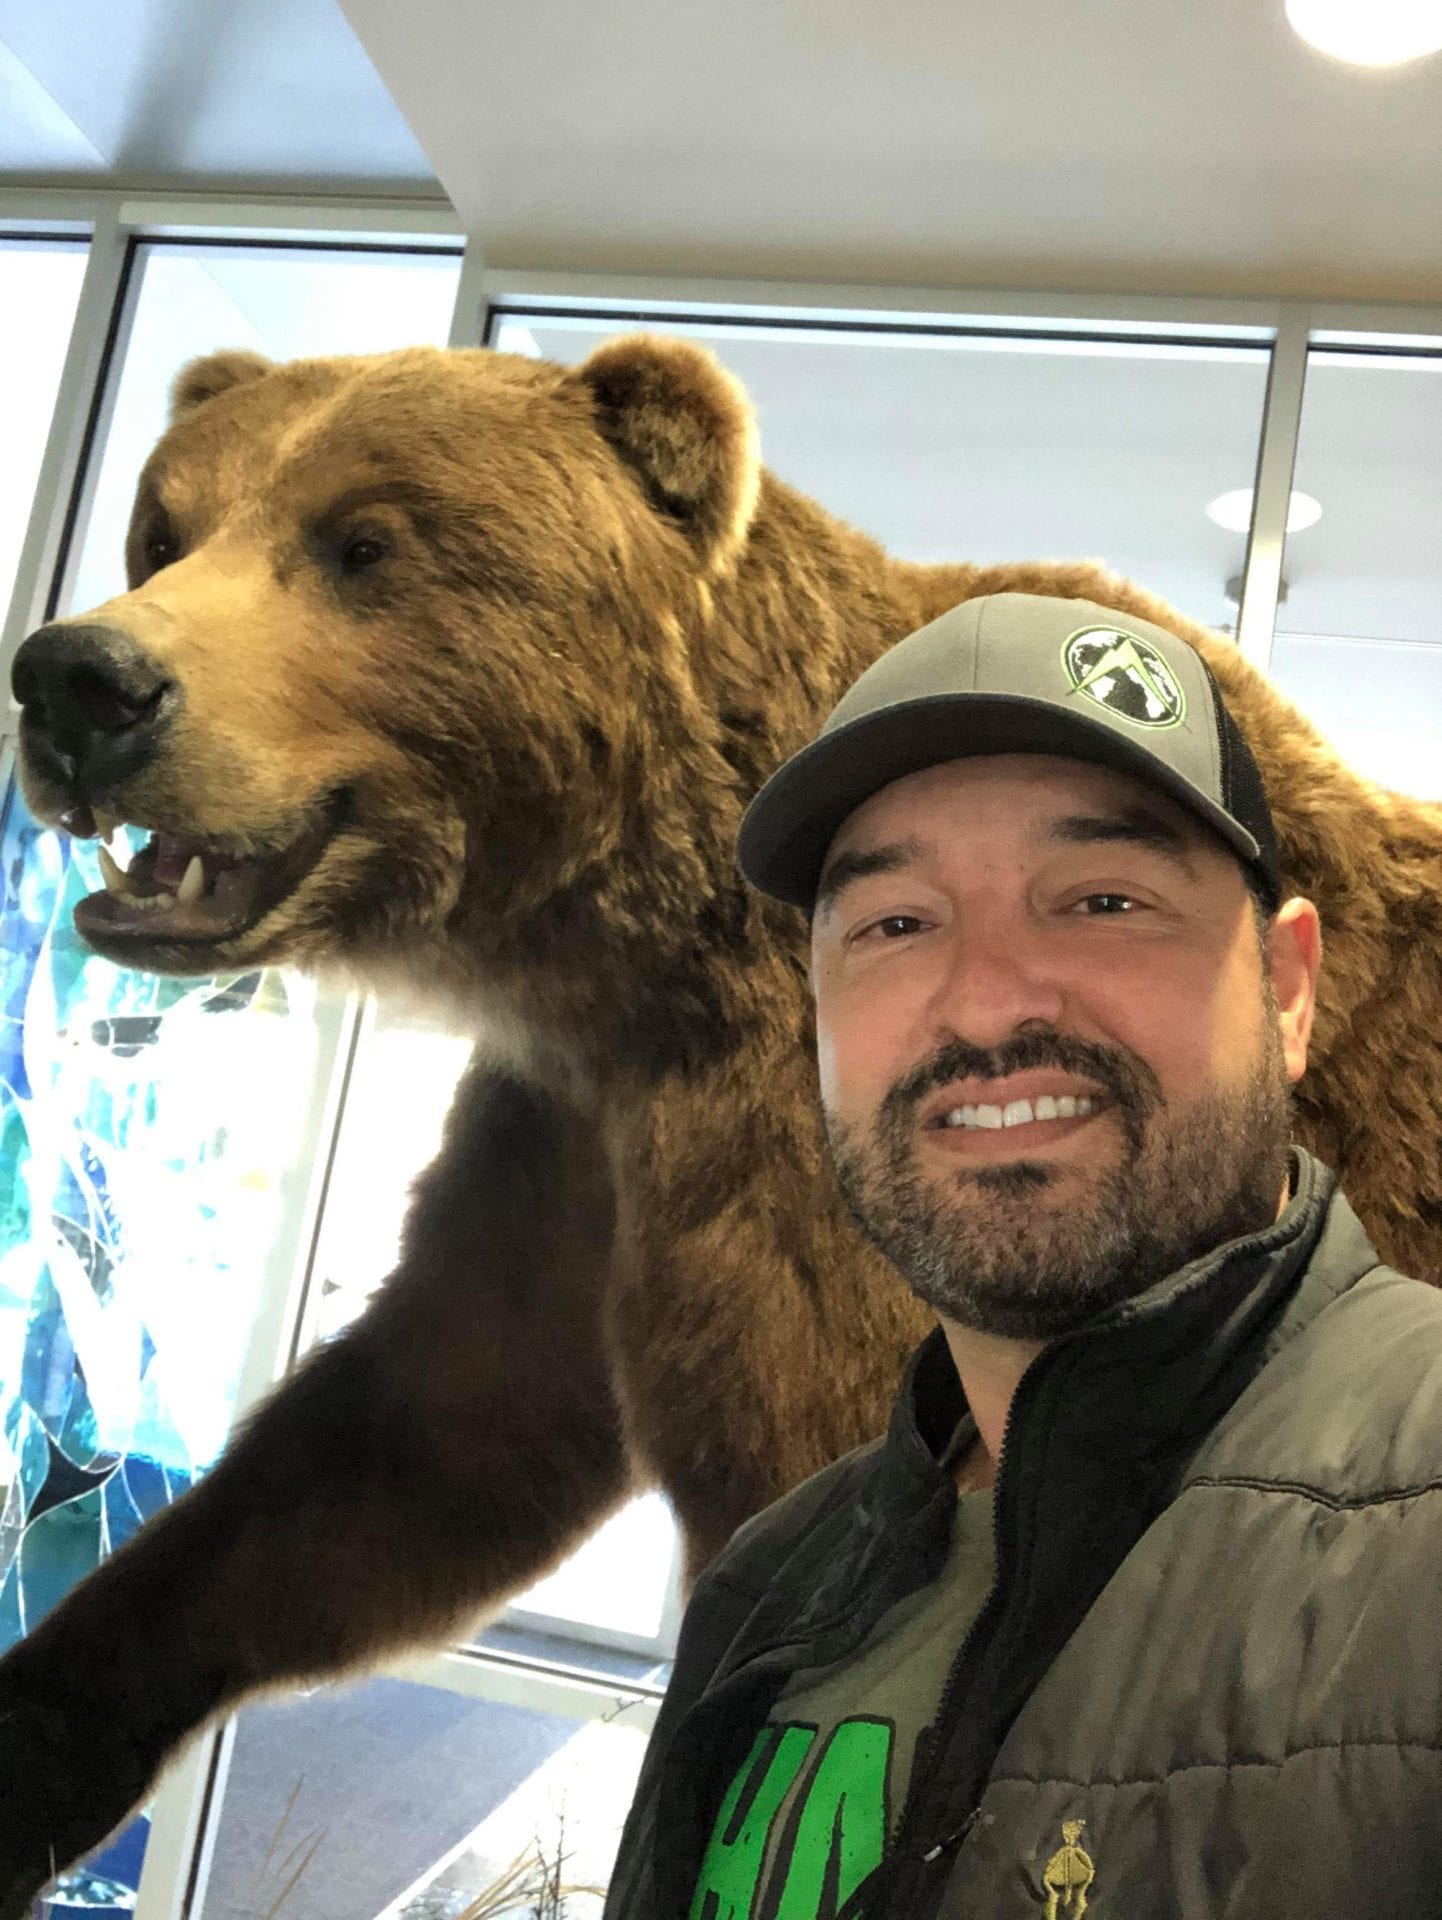 A big bear at the Fish and Game office in Kodiak.